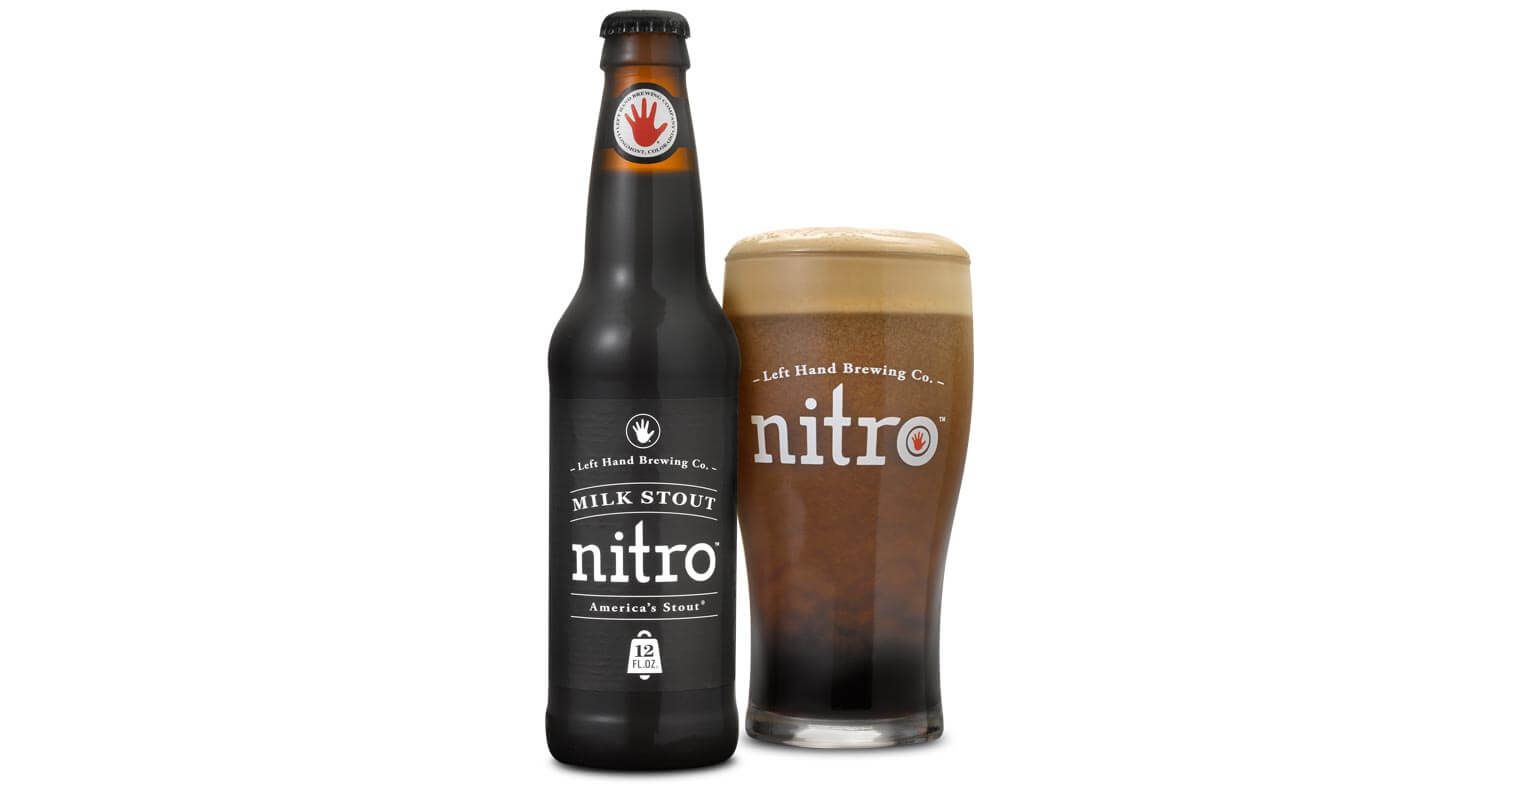 Toast St. Patrick’s Day with Milk Stout Nitro, featured image